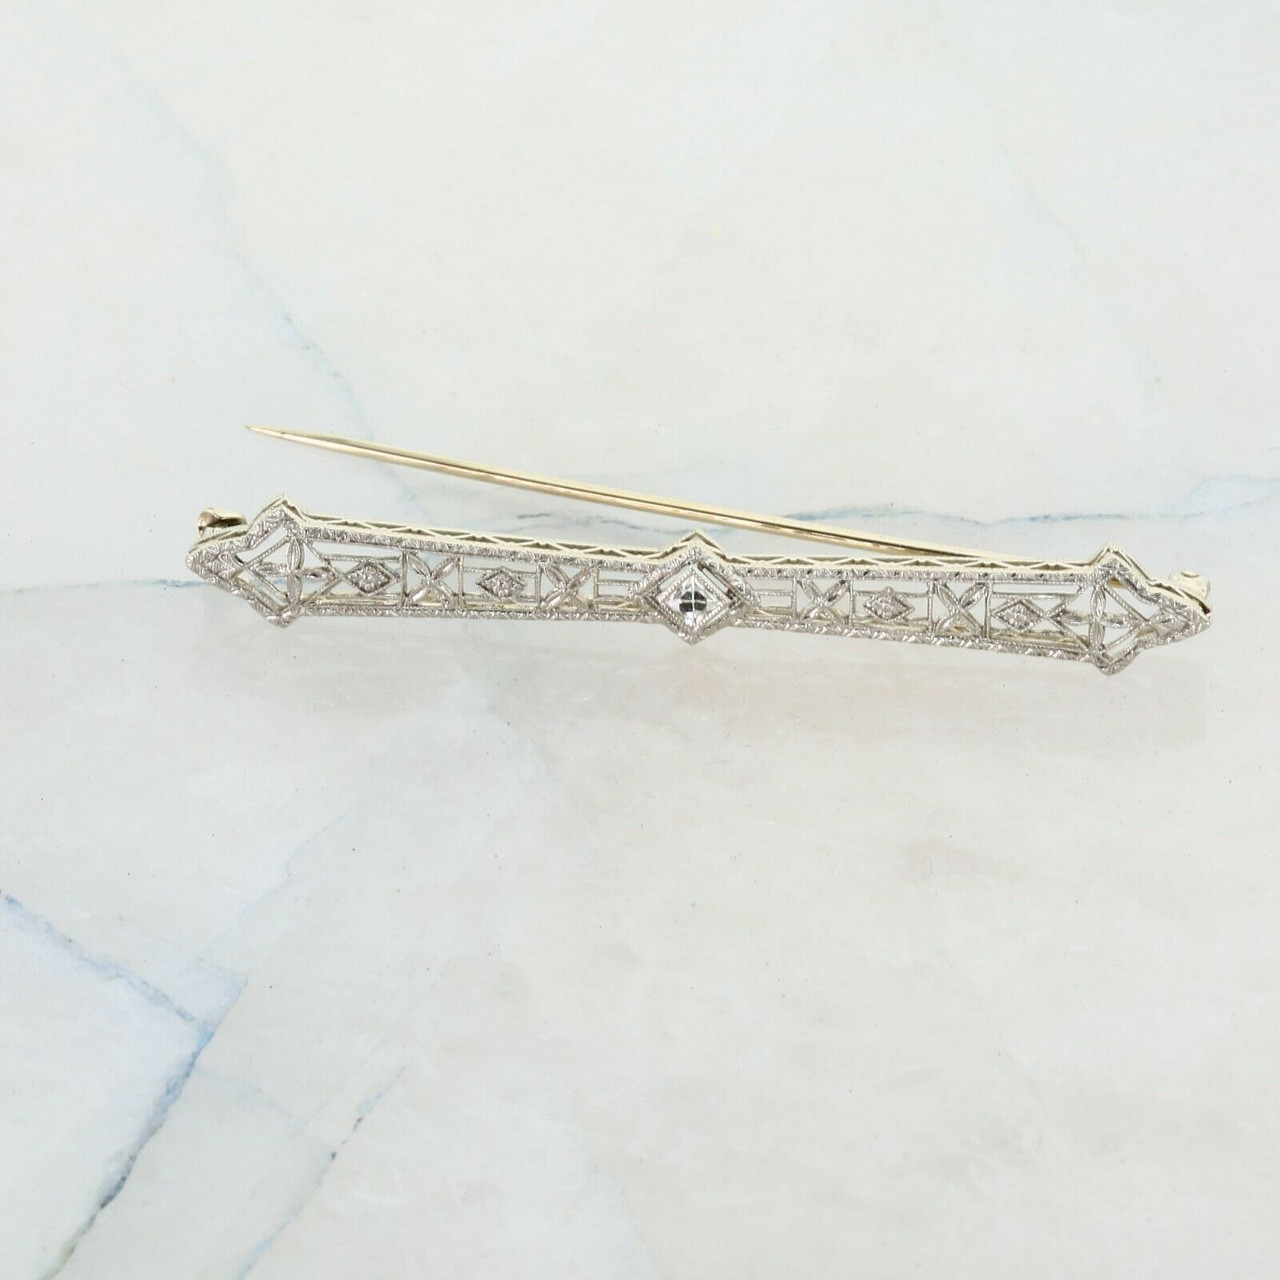 1920s Vintage Filigree 14K White Gold Diamond Pin Brooch with Blue Green  Accents - Timekeepersclayton